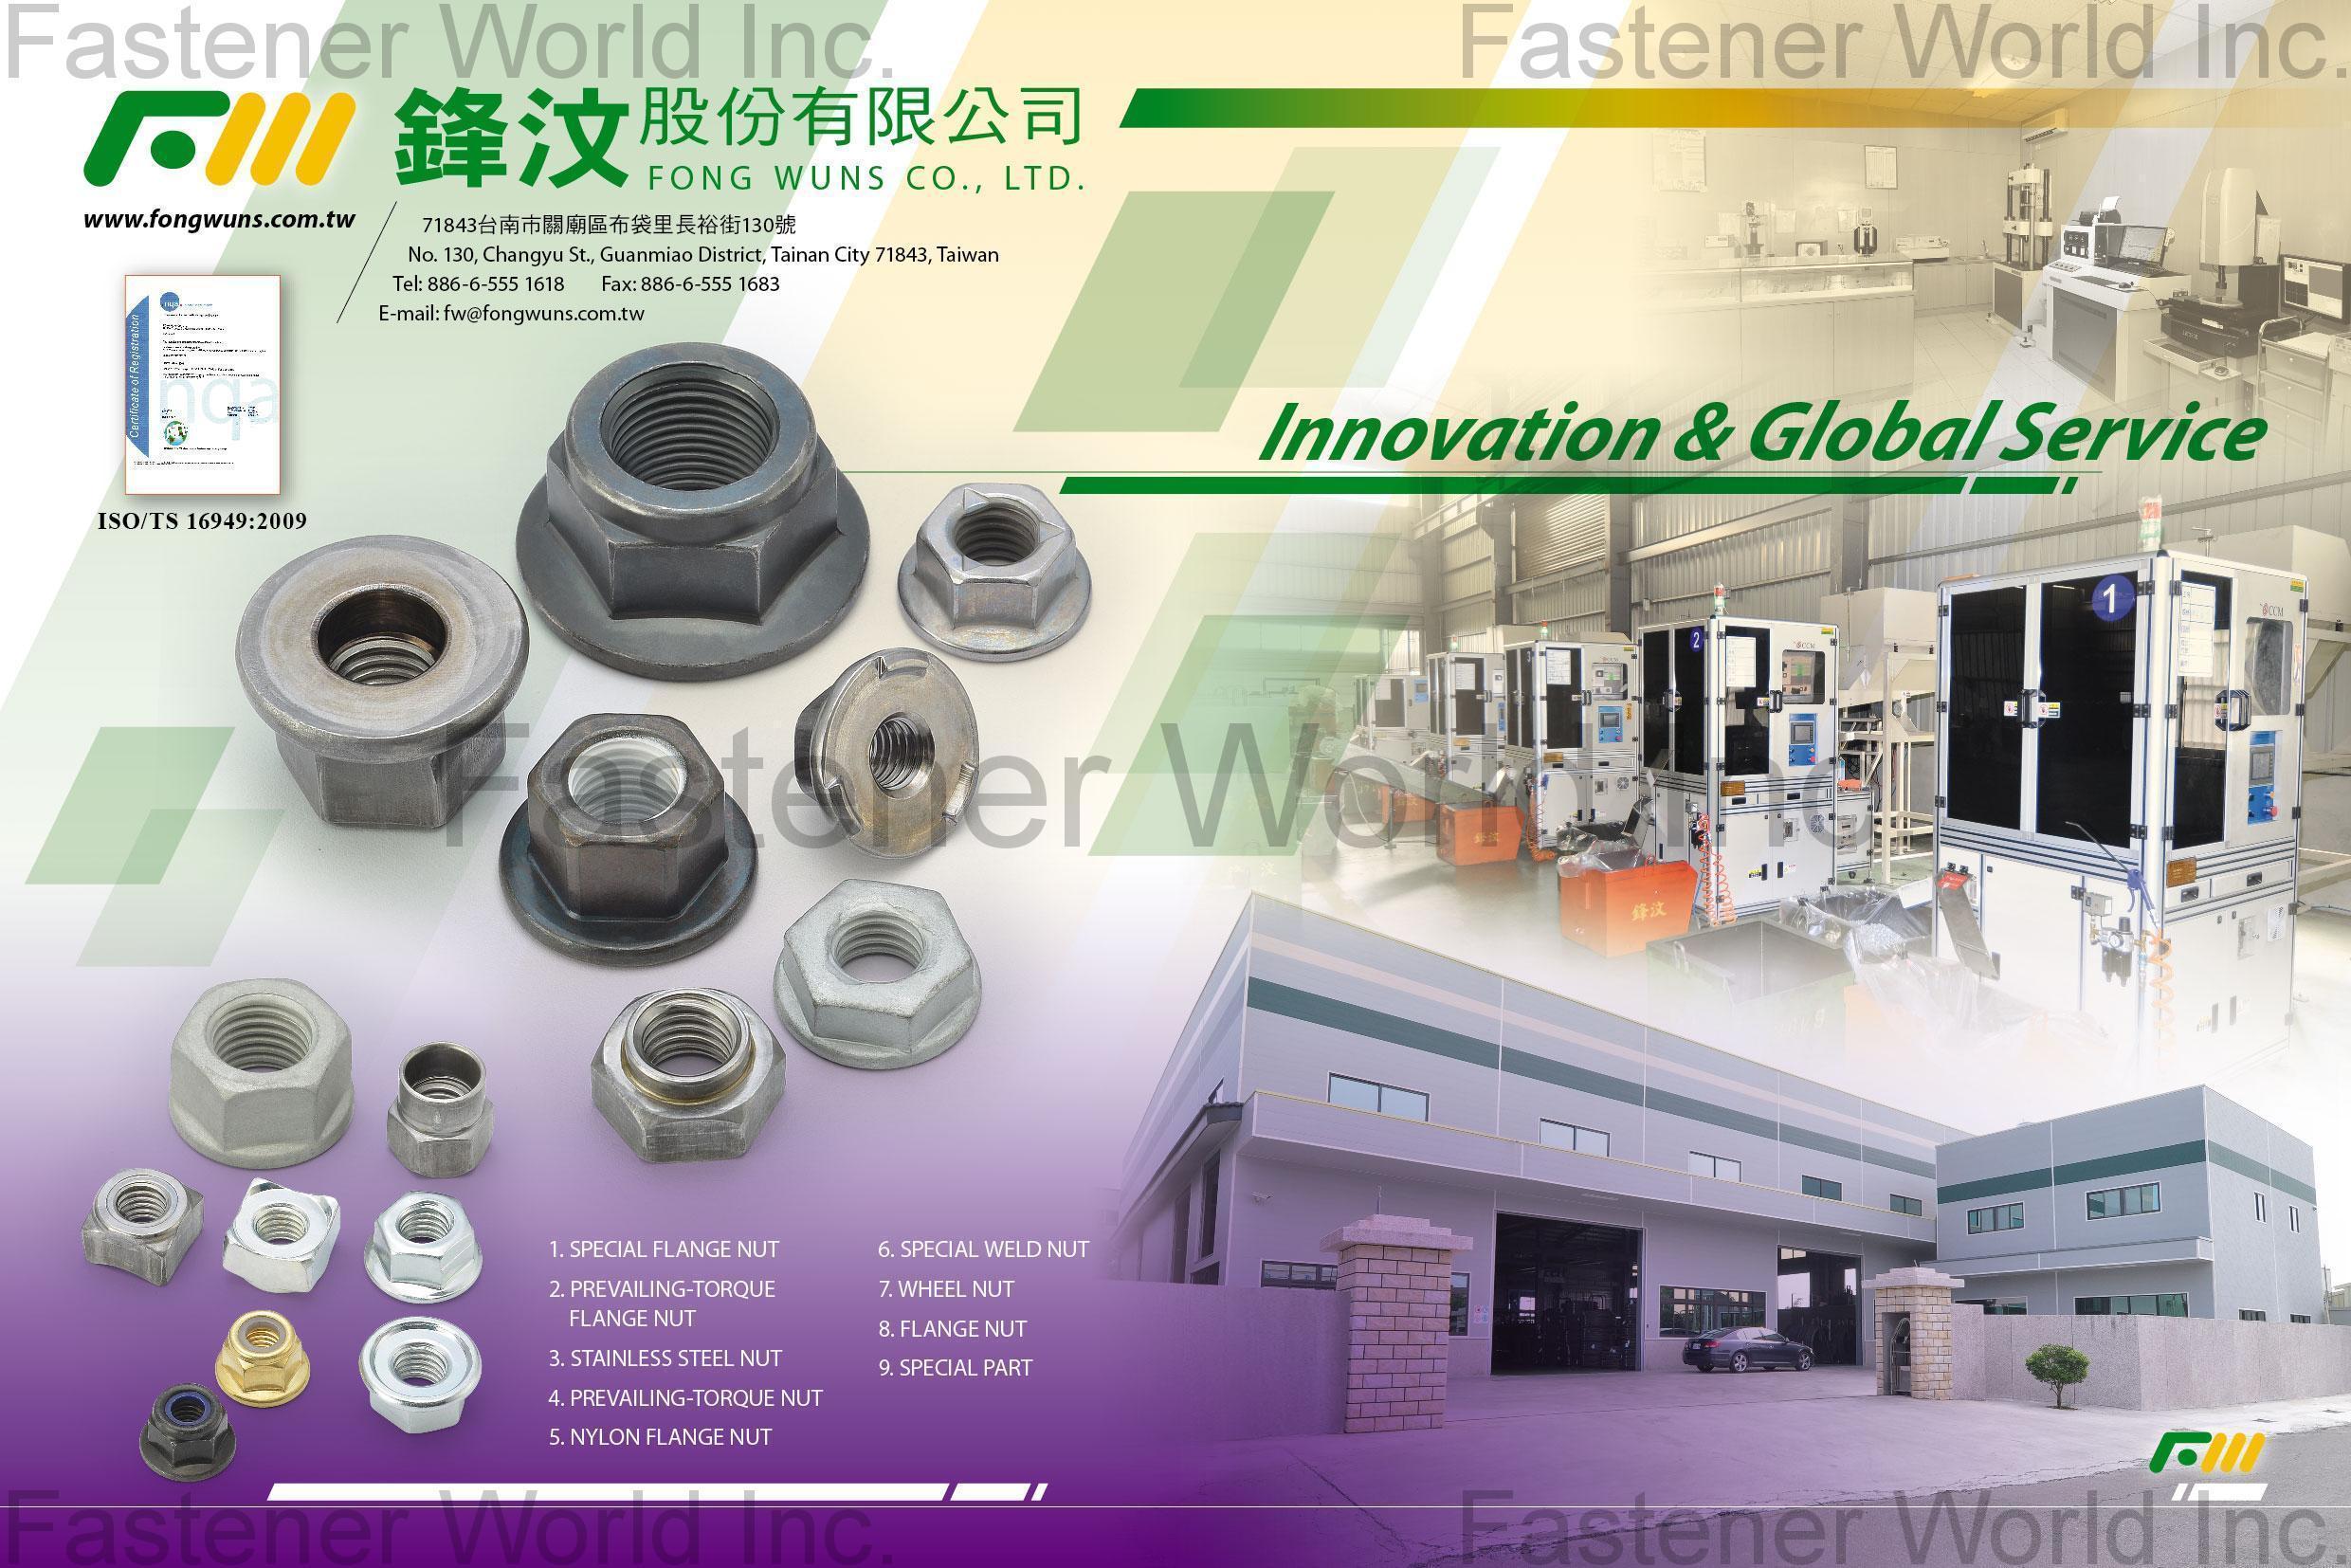 All Kinds Of Nuts Special Flange Nut, Prevailing-Torque Flange Nut, Stainless Steel Nut ,Prevailing-Torque Nut, Nylon Flange Nut, Special Weld Nut, Wheel Nut, Flange Nut, Special Part